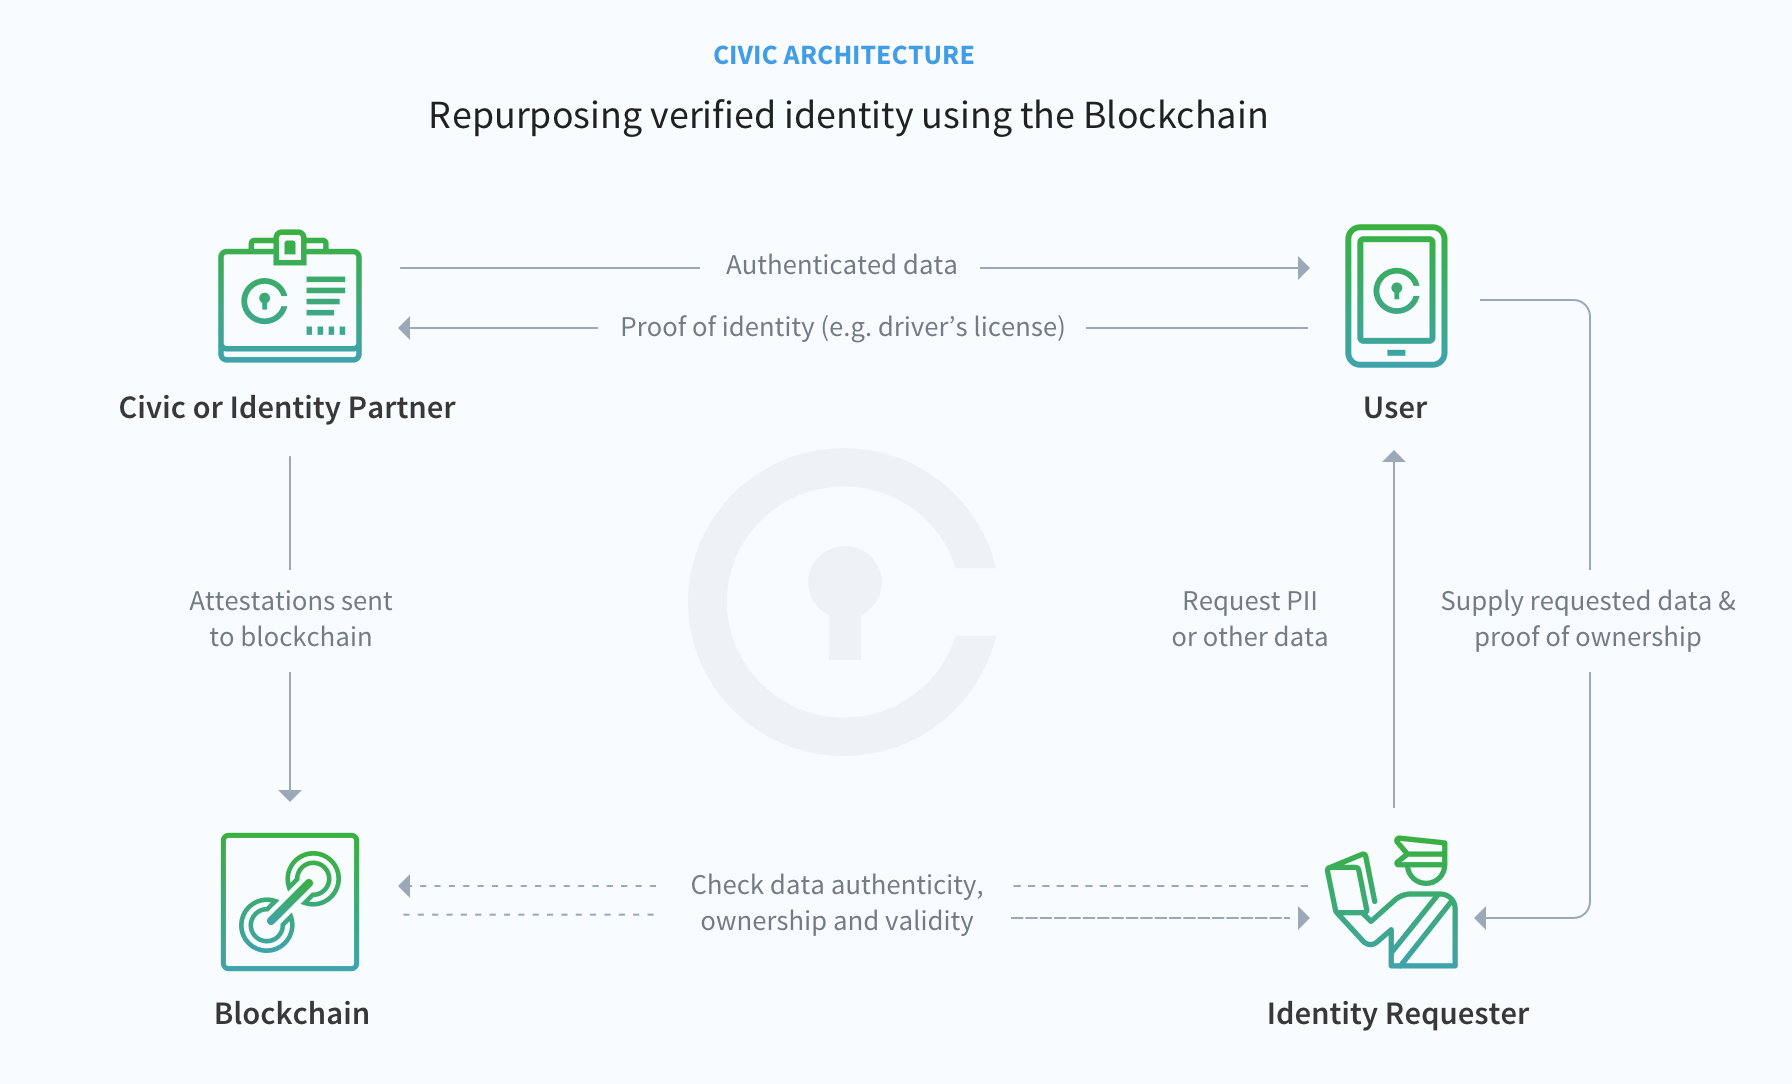 Overview of the architecture of Civic identity management service (source: token sale whitepaper)